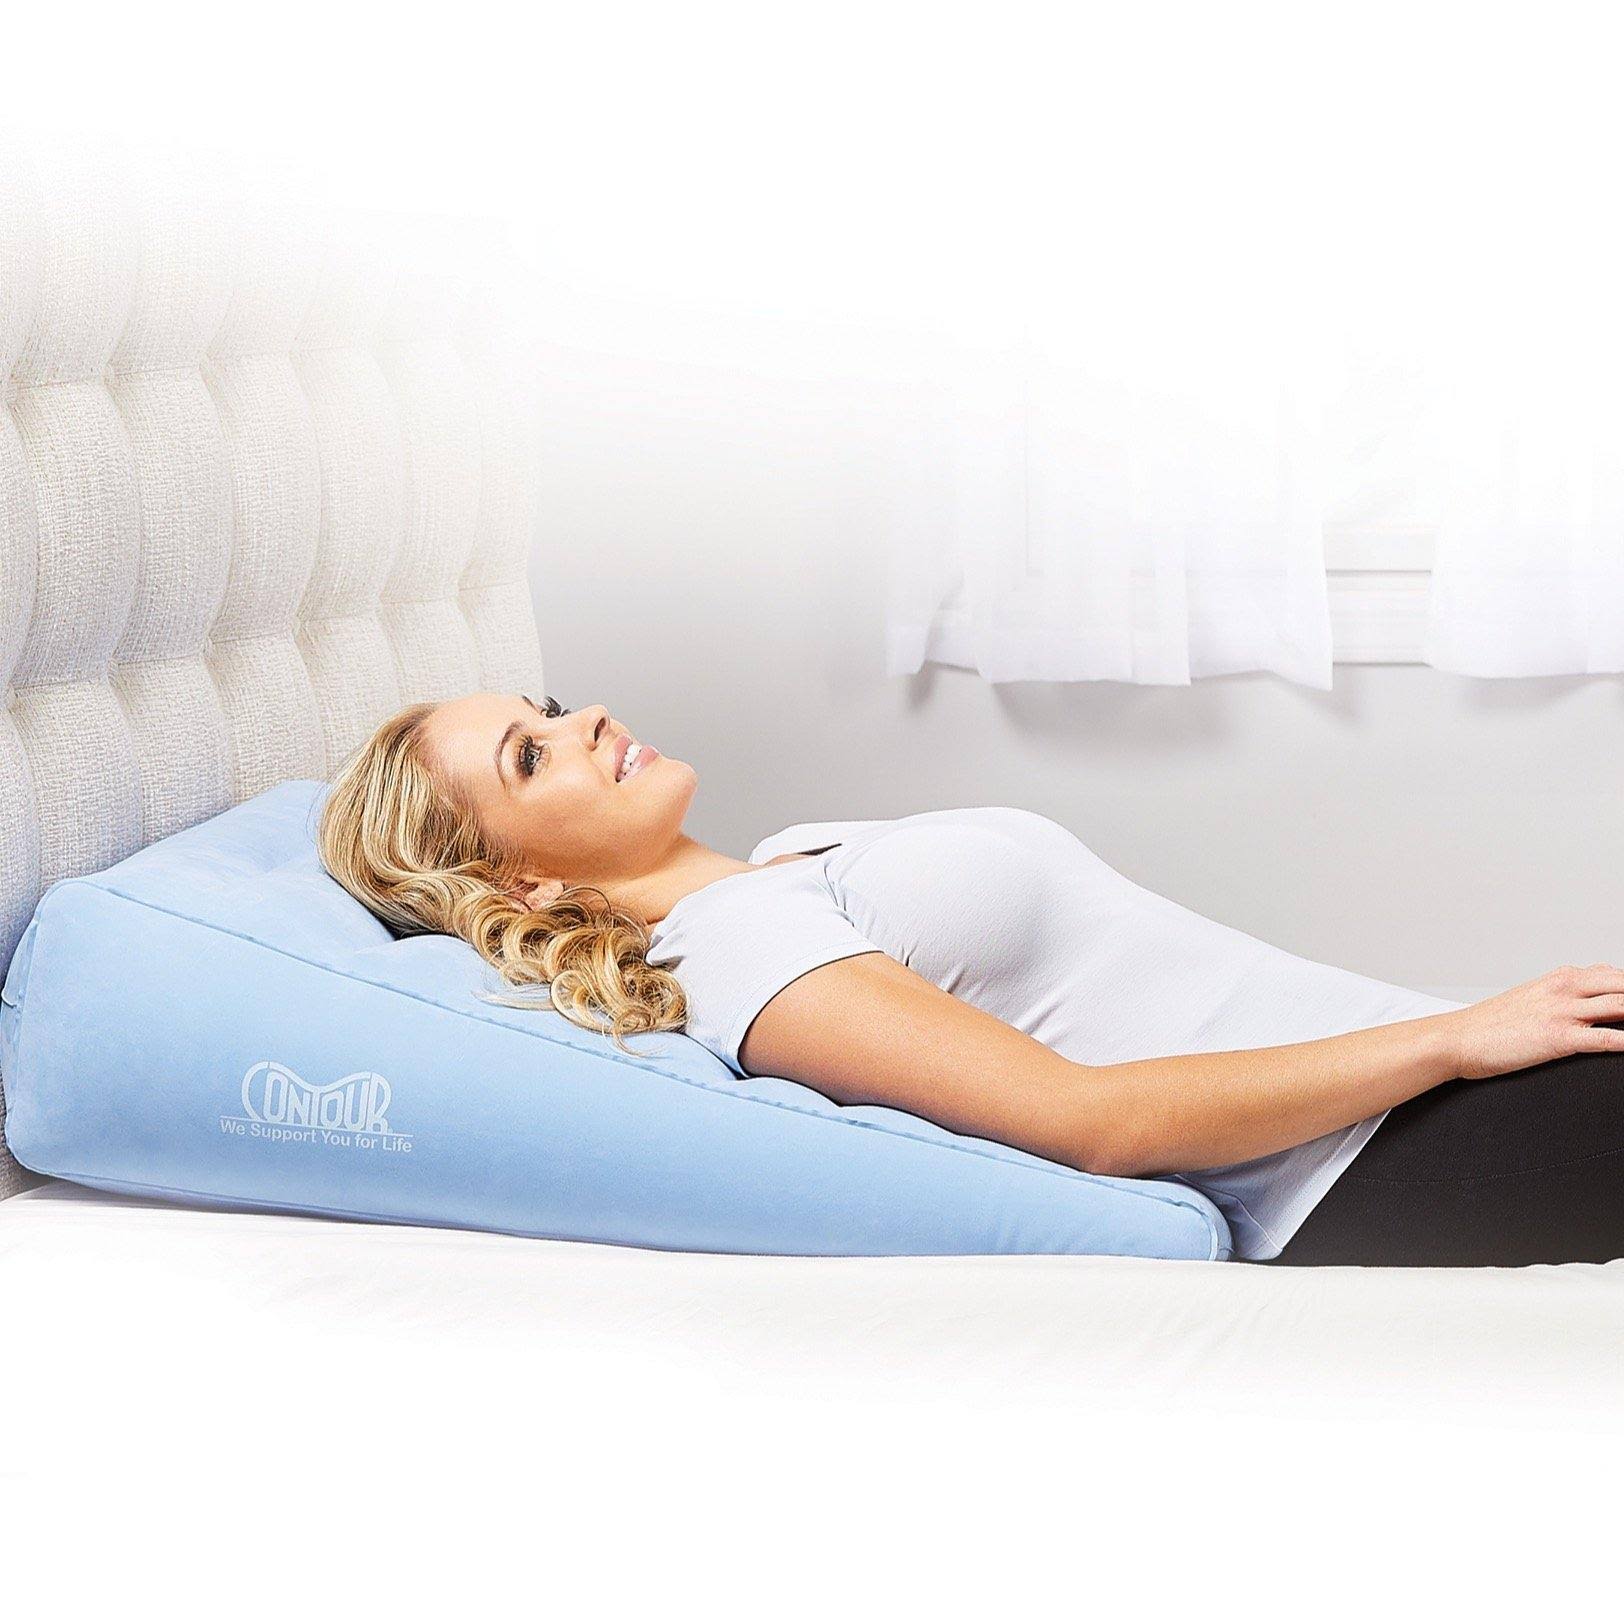 Contour 2-in-1 Inflatable Back Support Pain Relief Bed Wedge Cushion -